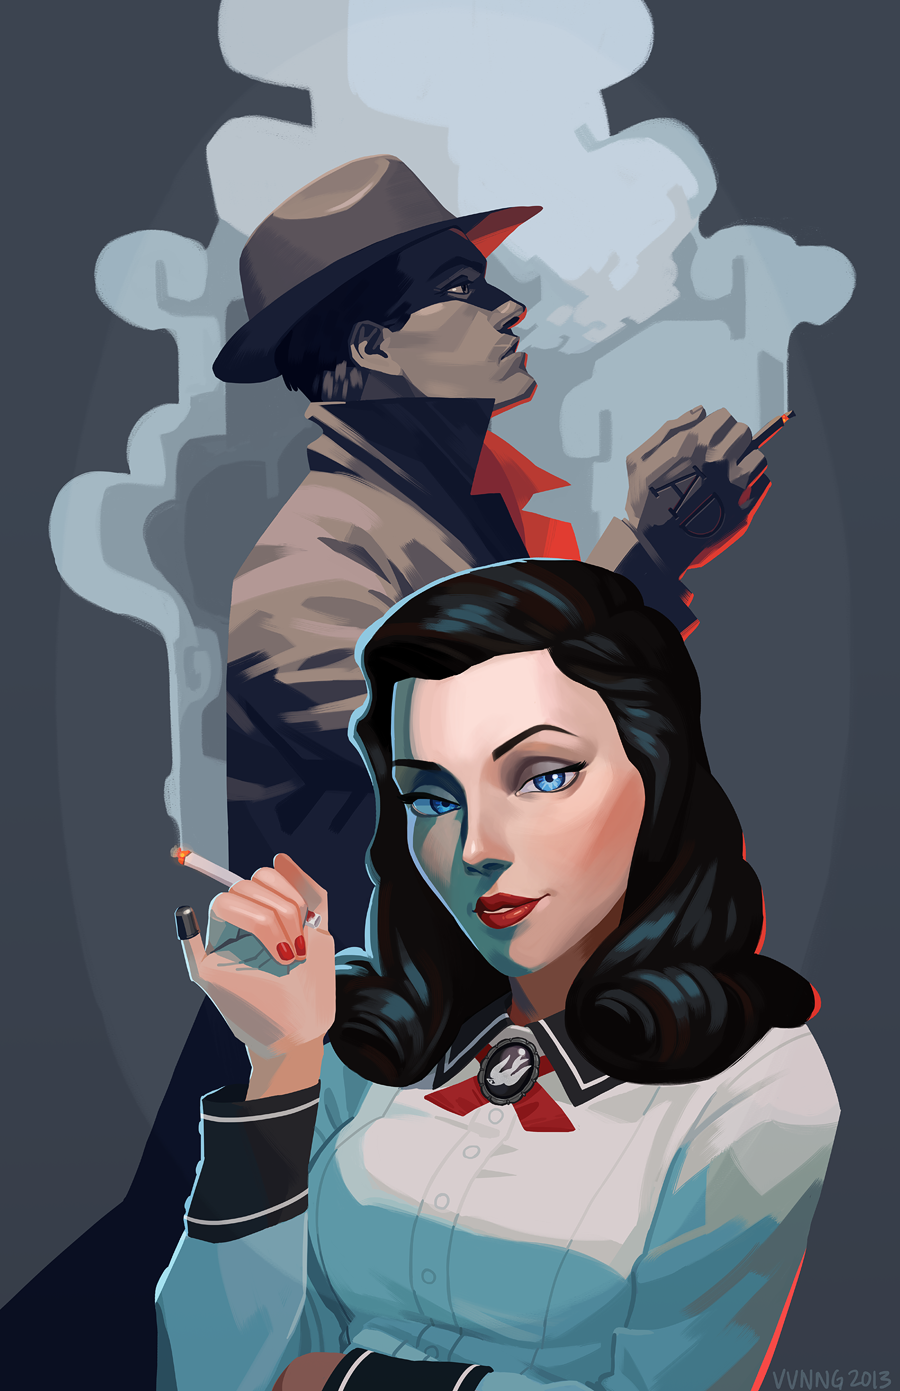 viivus:  I wanted to make my own Burial at Sea inspired poster, but with Elizabeth